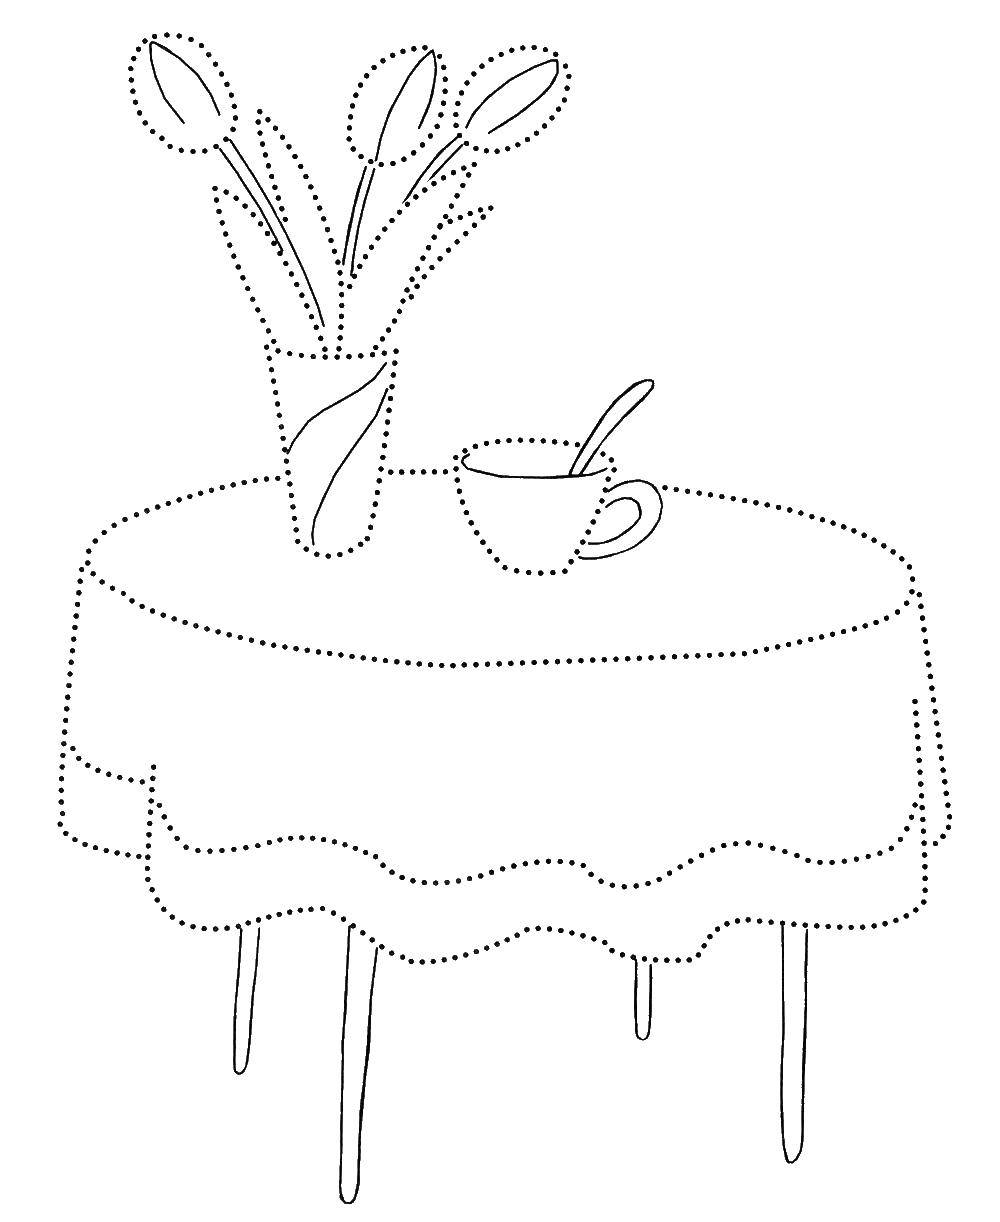 Coloring Kitchen table. Category The table. Tags:  Furniture, table, chair.